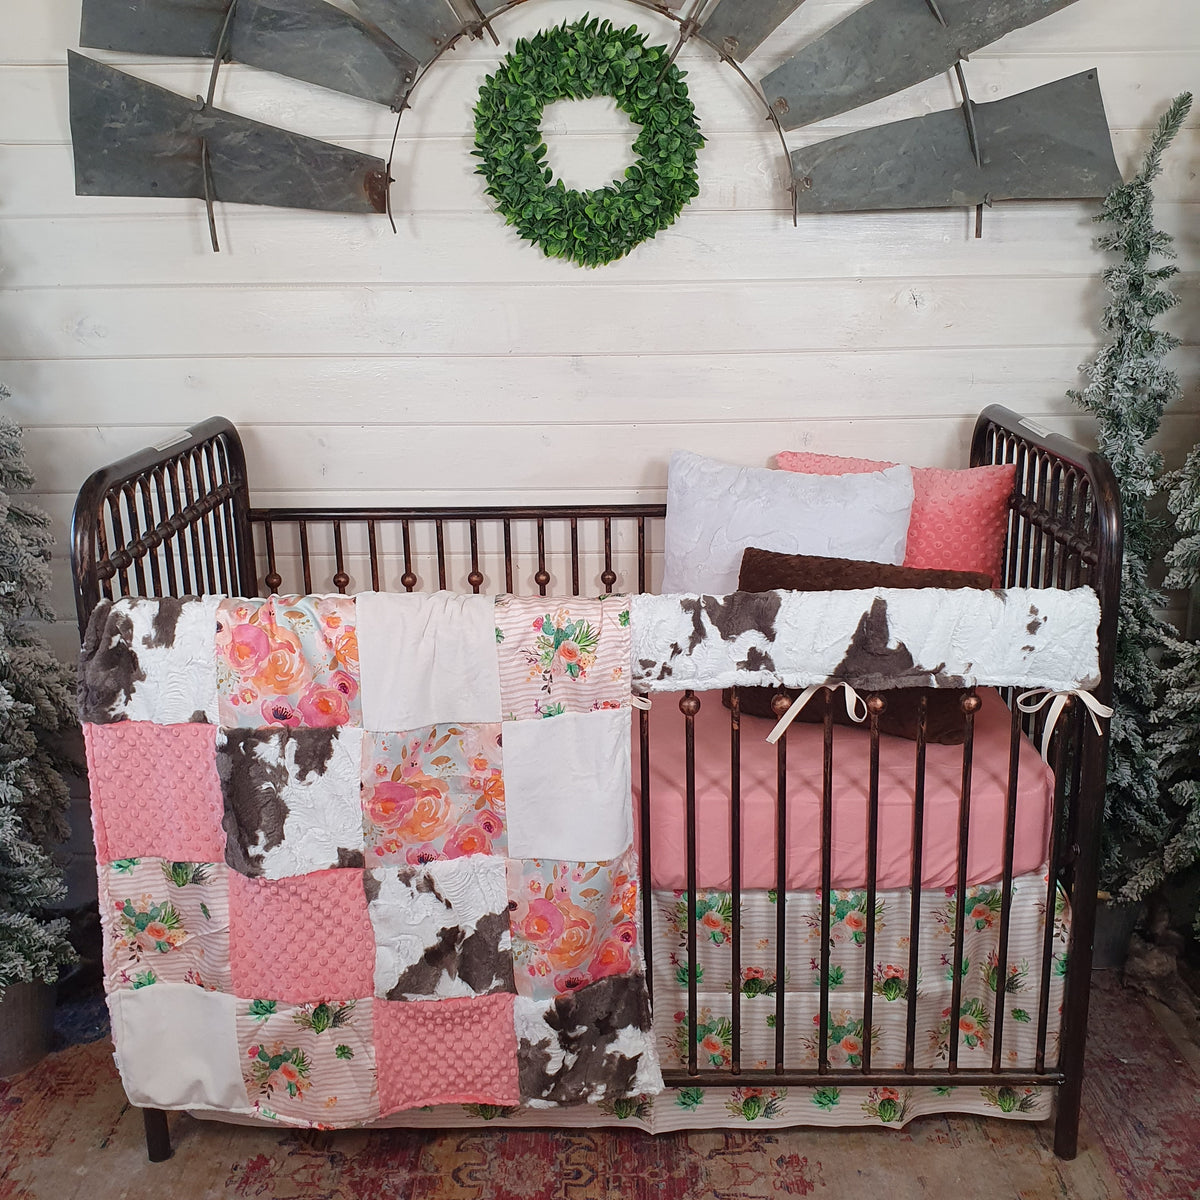 New Release Girl Crib Bedding- Watercolor Floral and Brownie Calf Minky Western Baby Bedding Collection - DBC Baby Bedding Co 